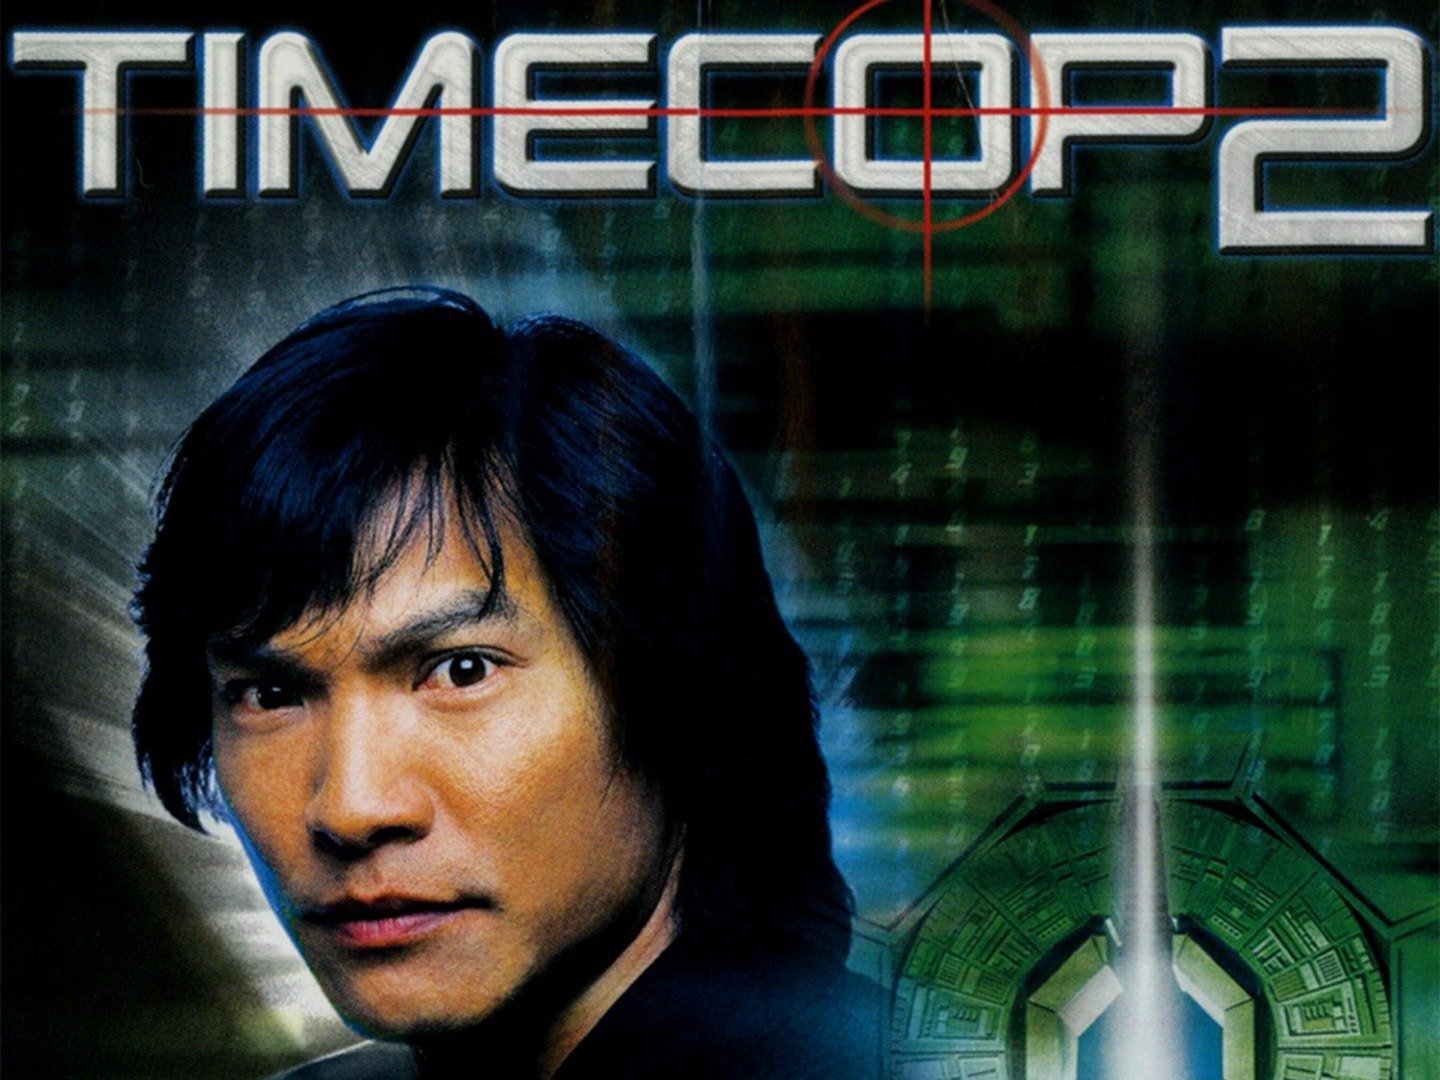 timecop 2 the movie full